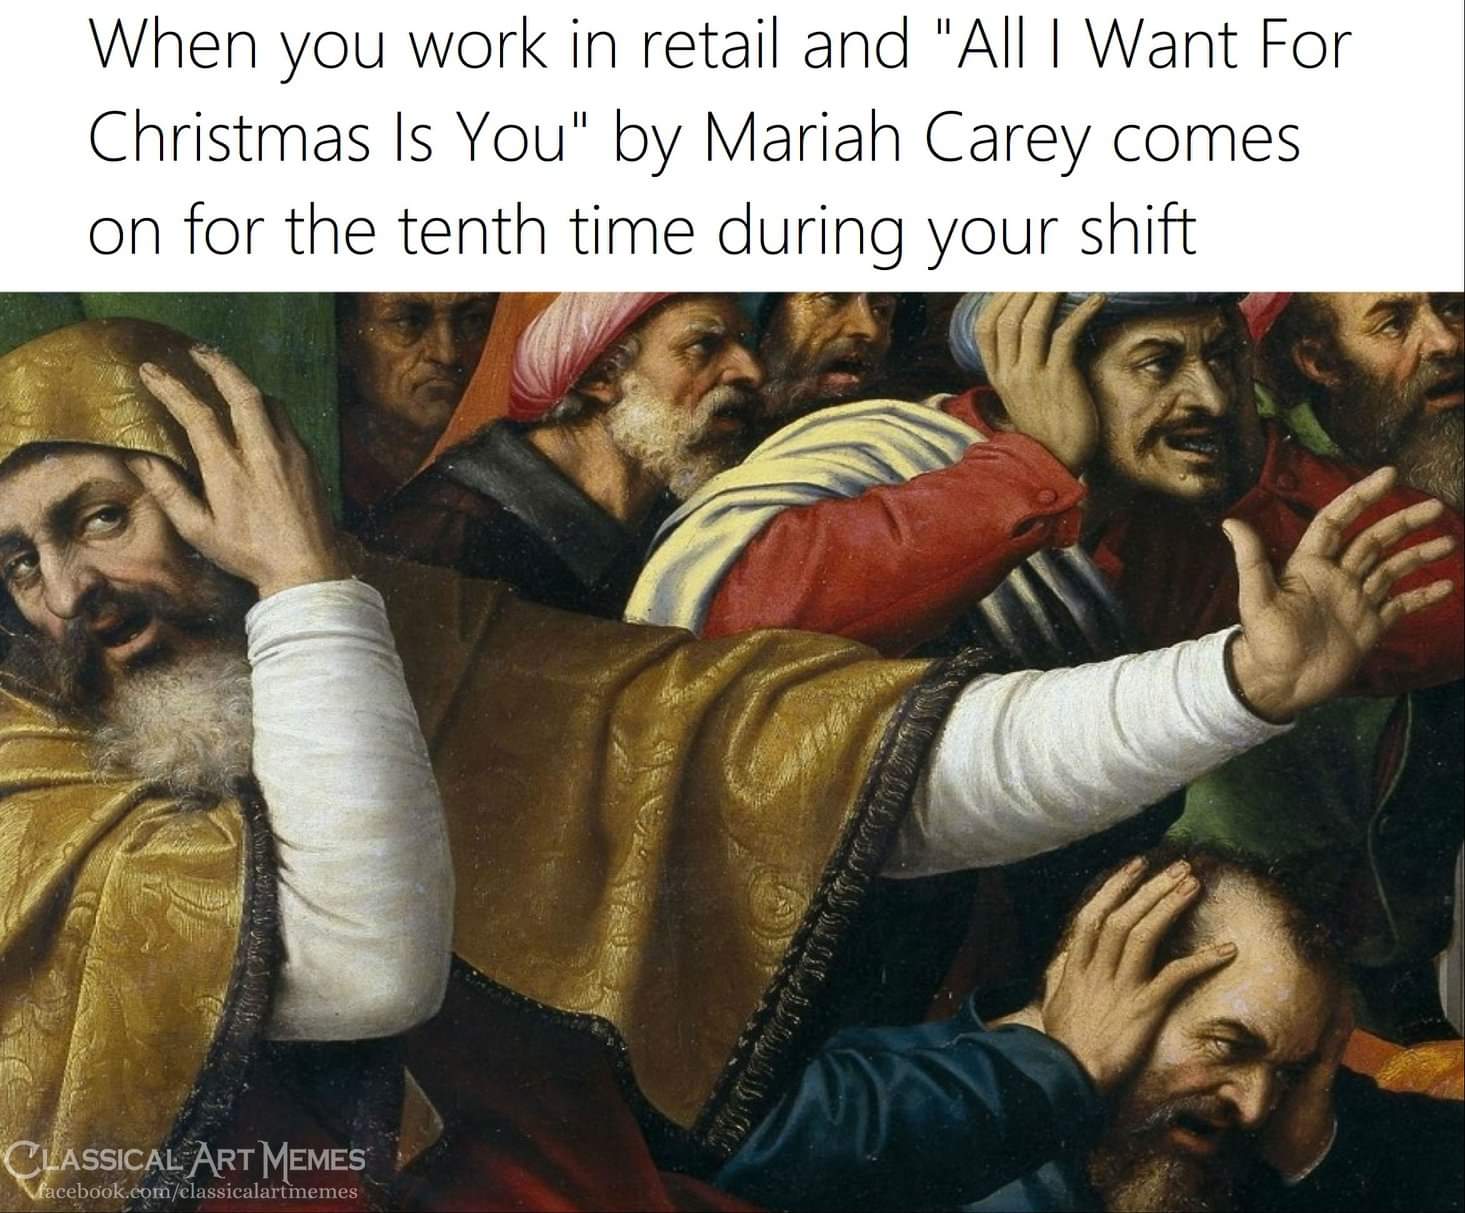 people talking about game of thrones - When you work in retail and "All I Want For Christmas Is You" by Mariah Carey comes on for the tenth time during your shift Classical Art Memes Vacebook.comclassicalartmemes